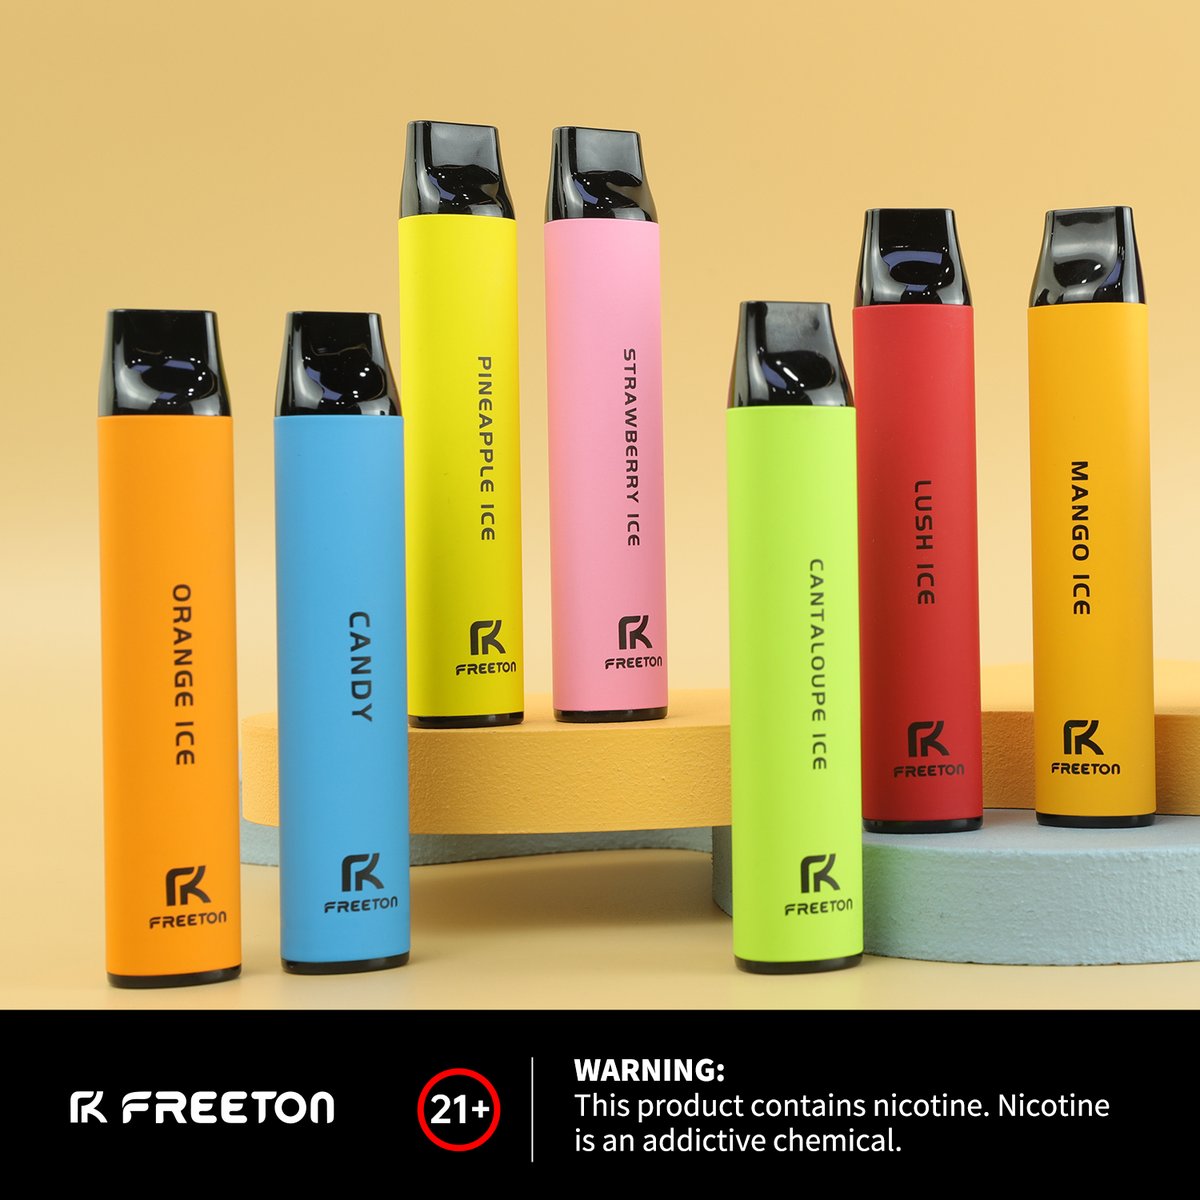 One of FREETON's most popular disposable pods--DV2 2500PUFFS
Hands up if you have this beauty.
freetontech.com/disposable-pod…
#freetondv2 #vapelife #vapesafe #disposablepod #disposablevape #vapesociety #vapetime #vapeday #vapestory #autovape #lovevape #vapenow #vape #vapeclouds